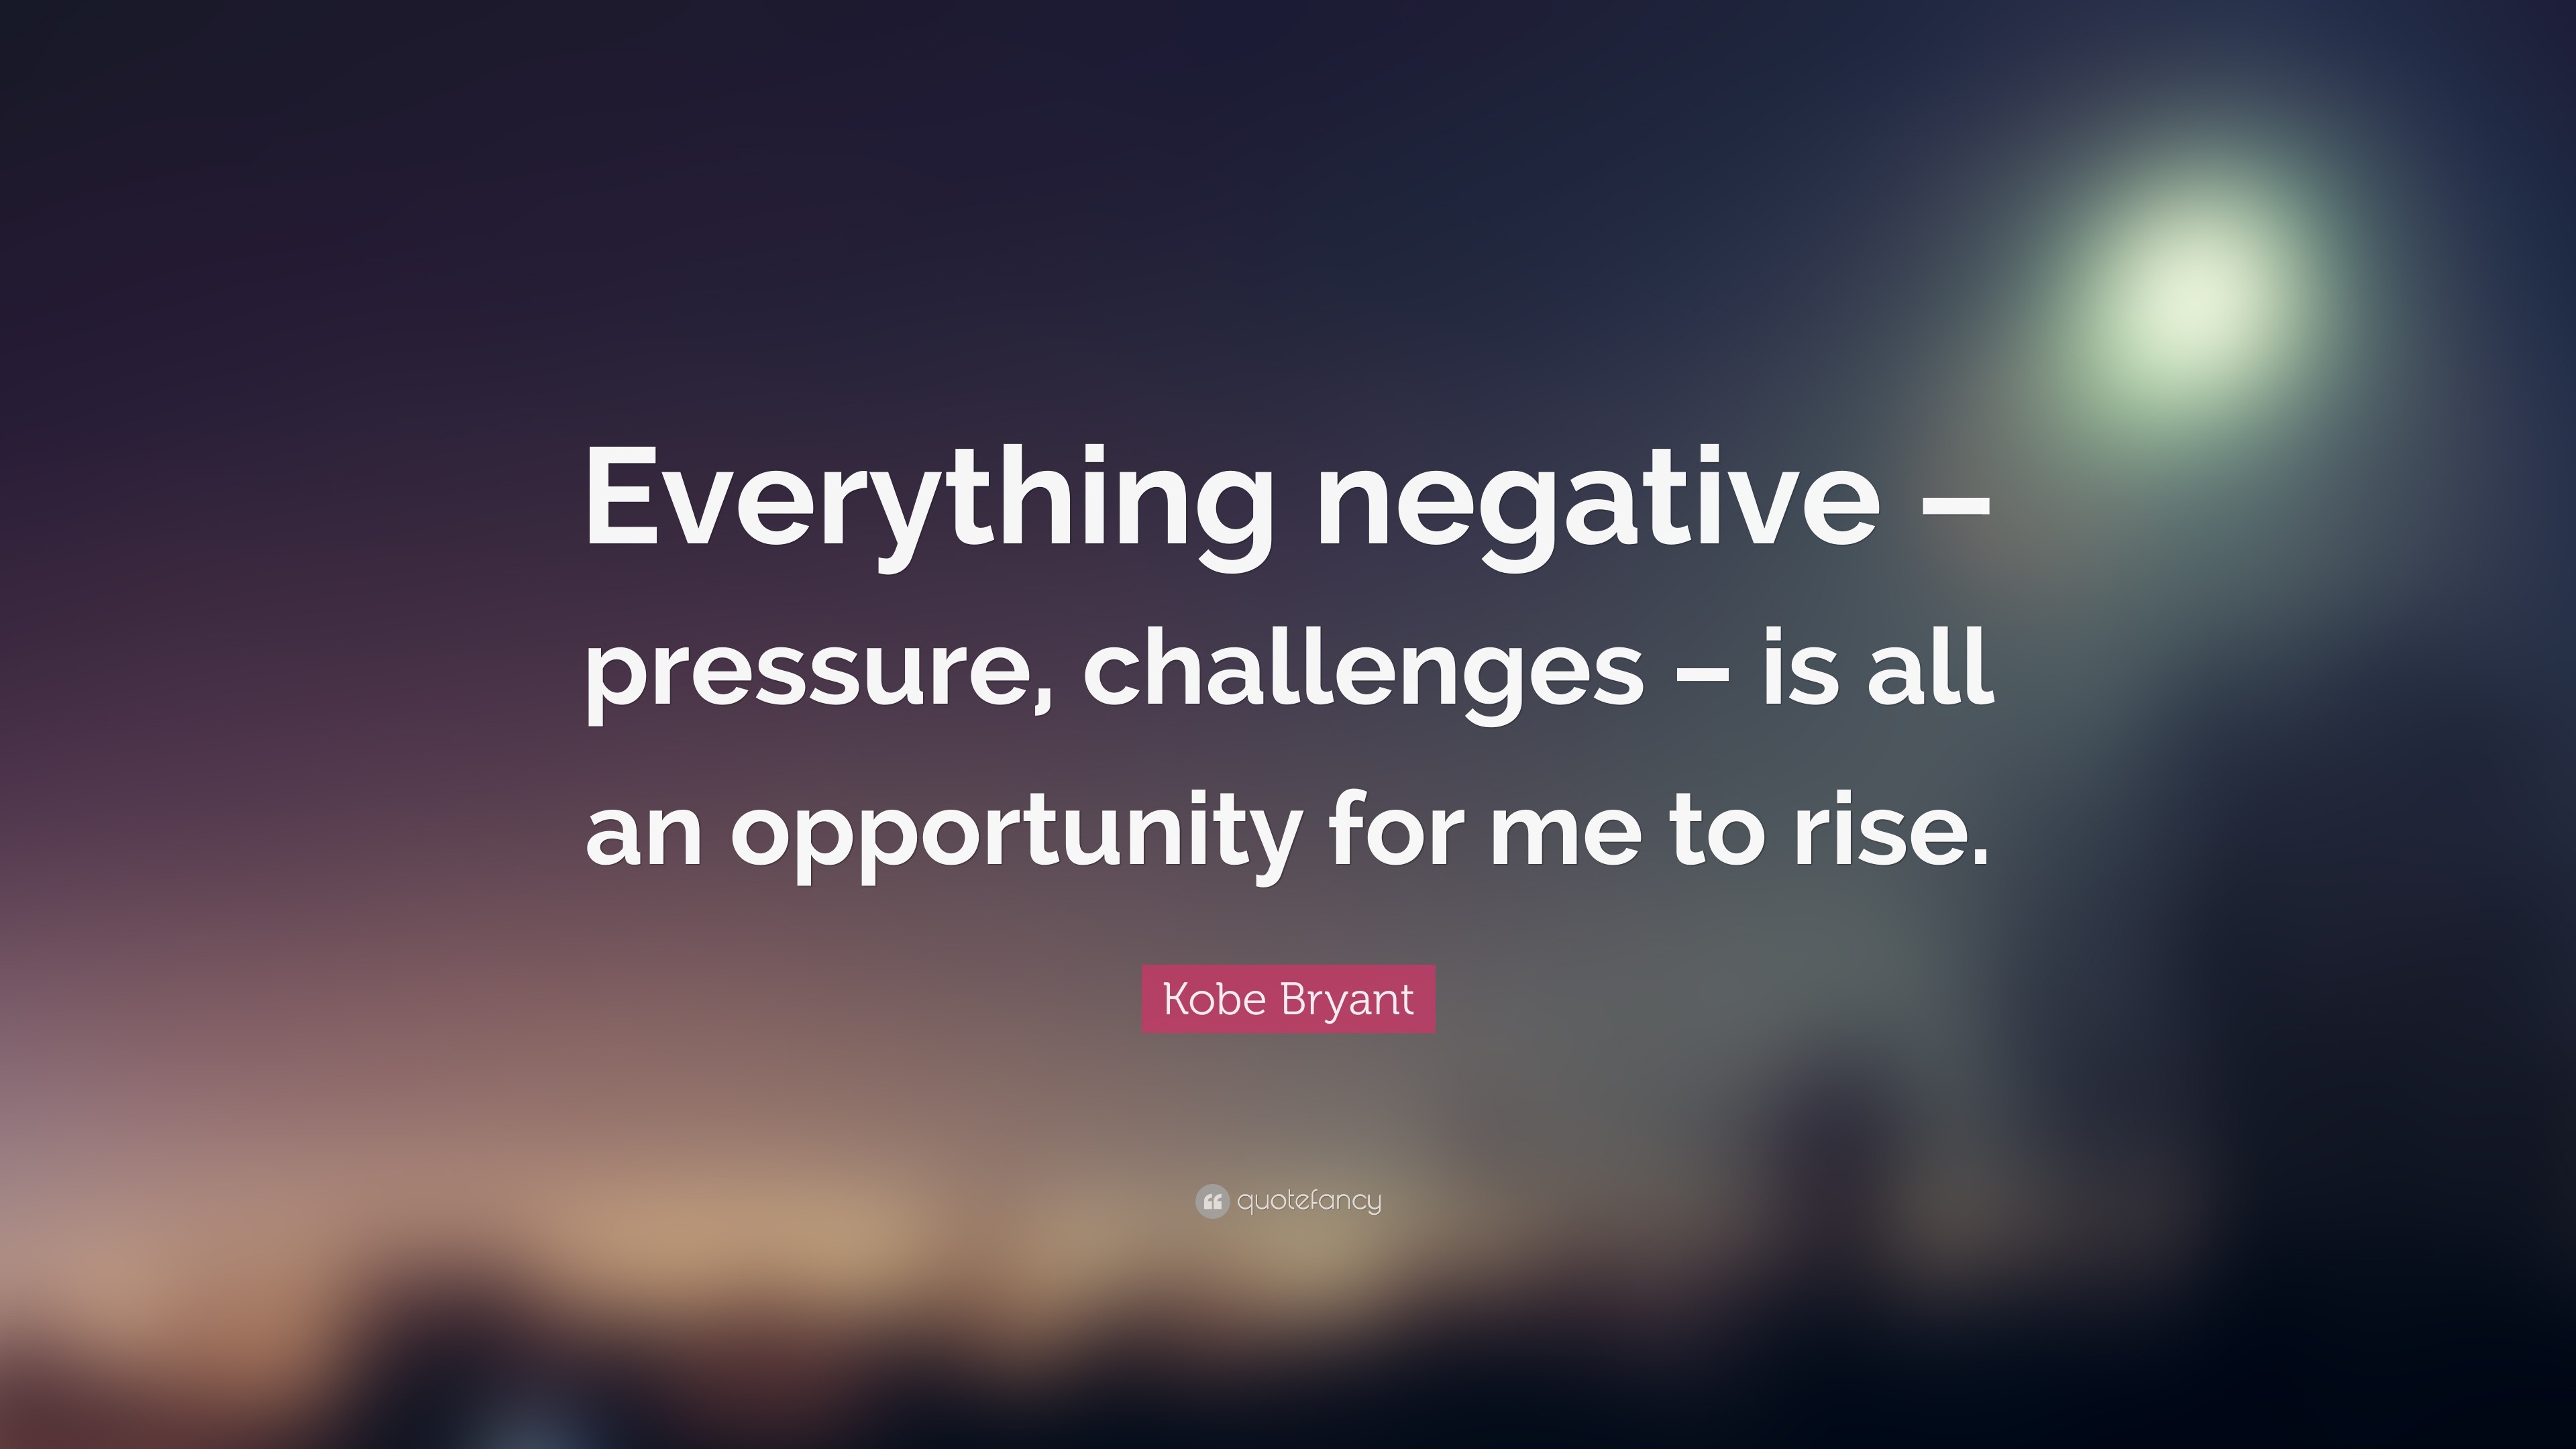 43415 Kobe Bryant Quote Everything negative pressure challenges is all